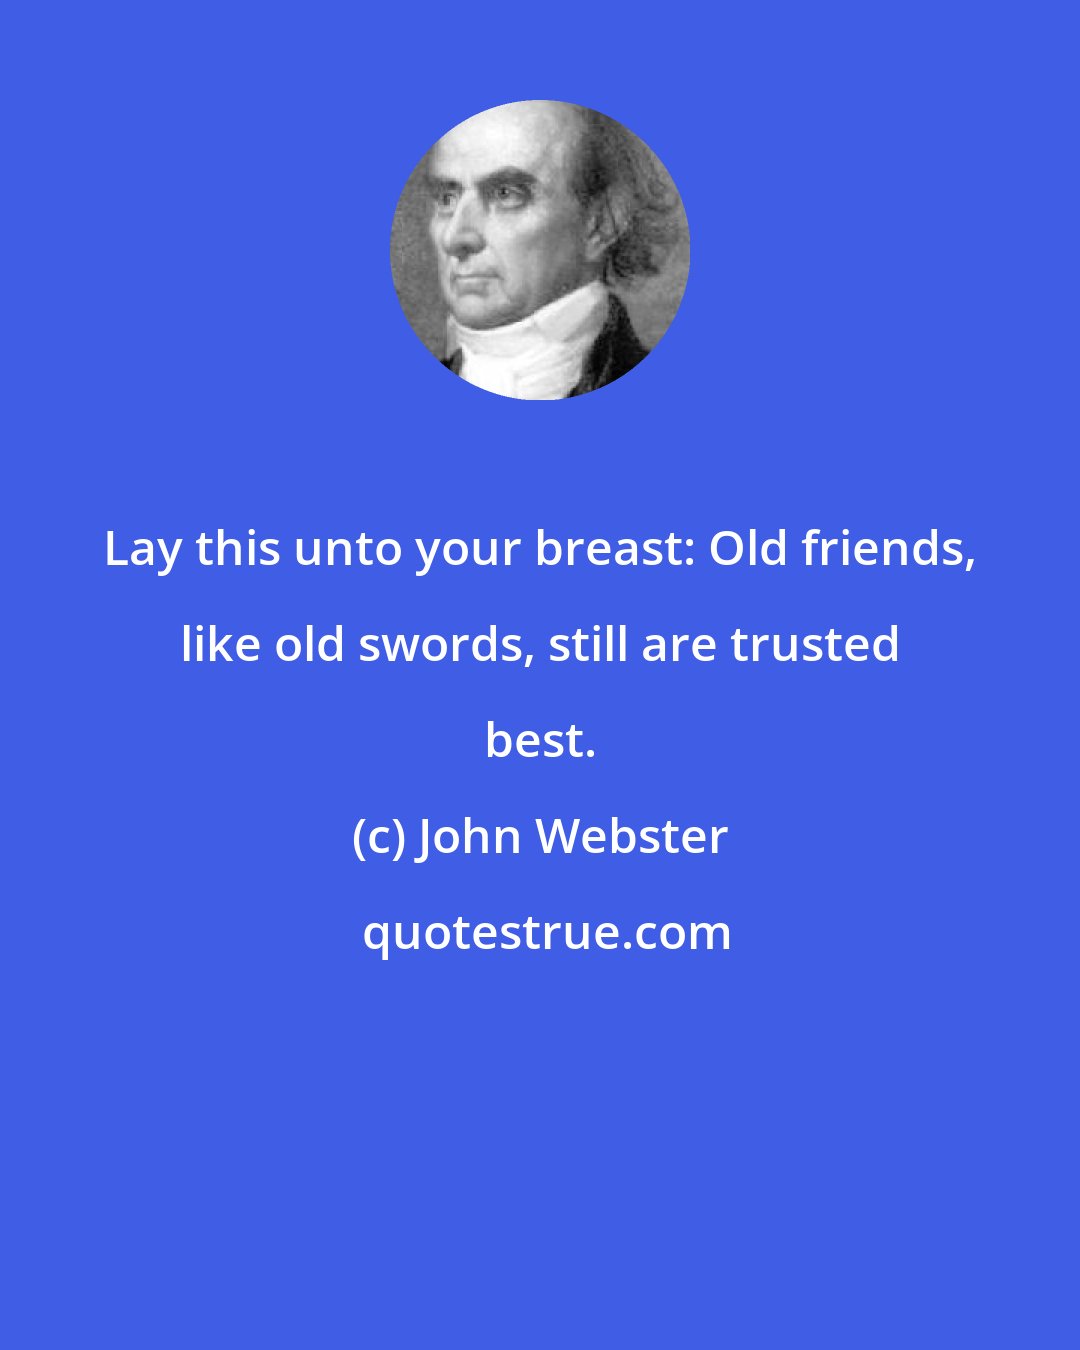 John Webster: Lay this unto your breast: Old friends, like old swords, still are trusted best.